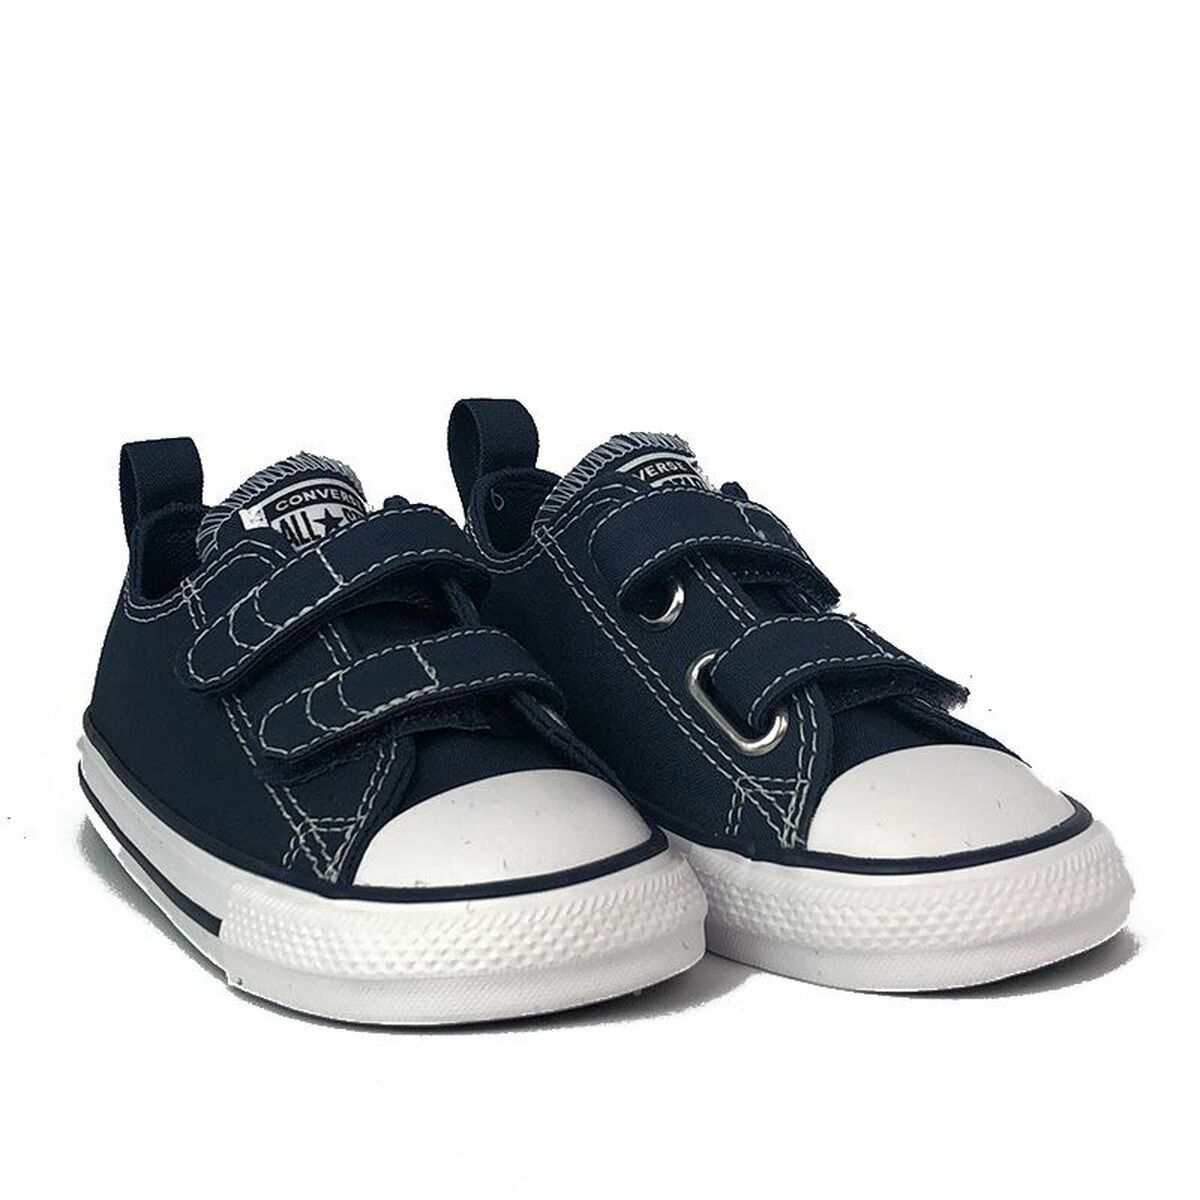 Children’s Casual Trainers Converse Chuck Taylor All Star Navy Blue Velcro